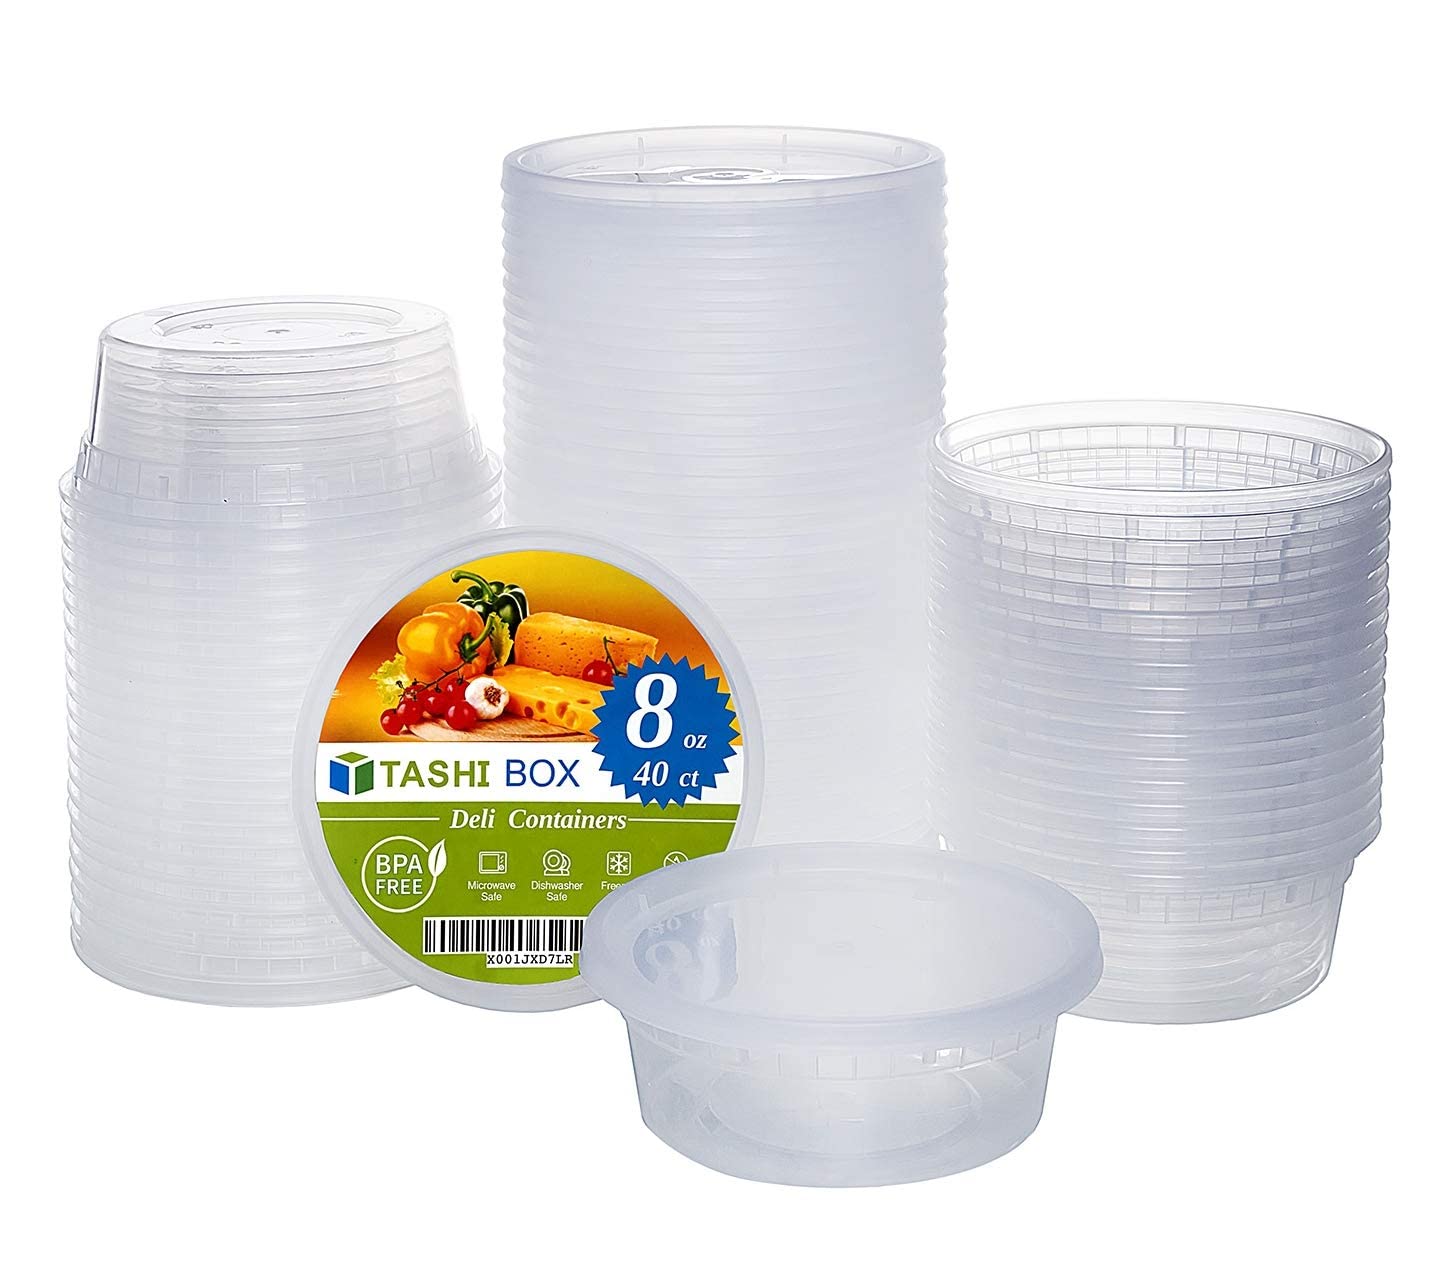 Book Cover [TashiBox] 8 oz food storage deli containers with lids - 40 sets